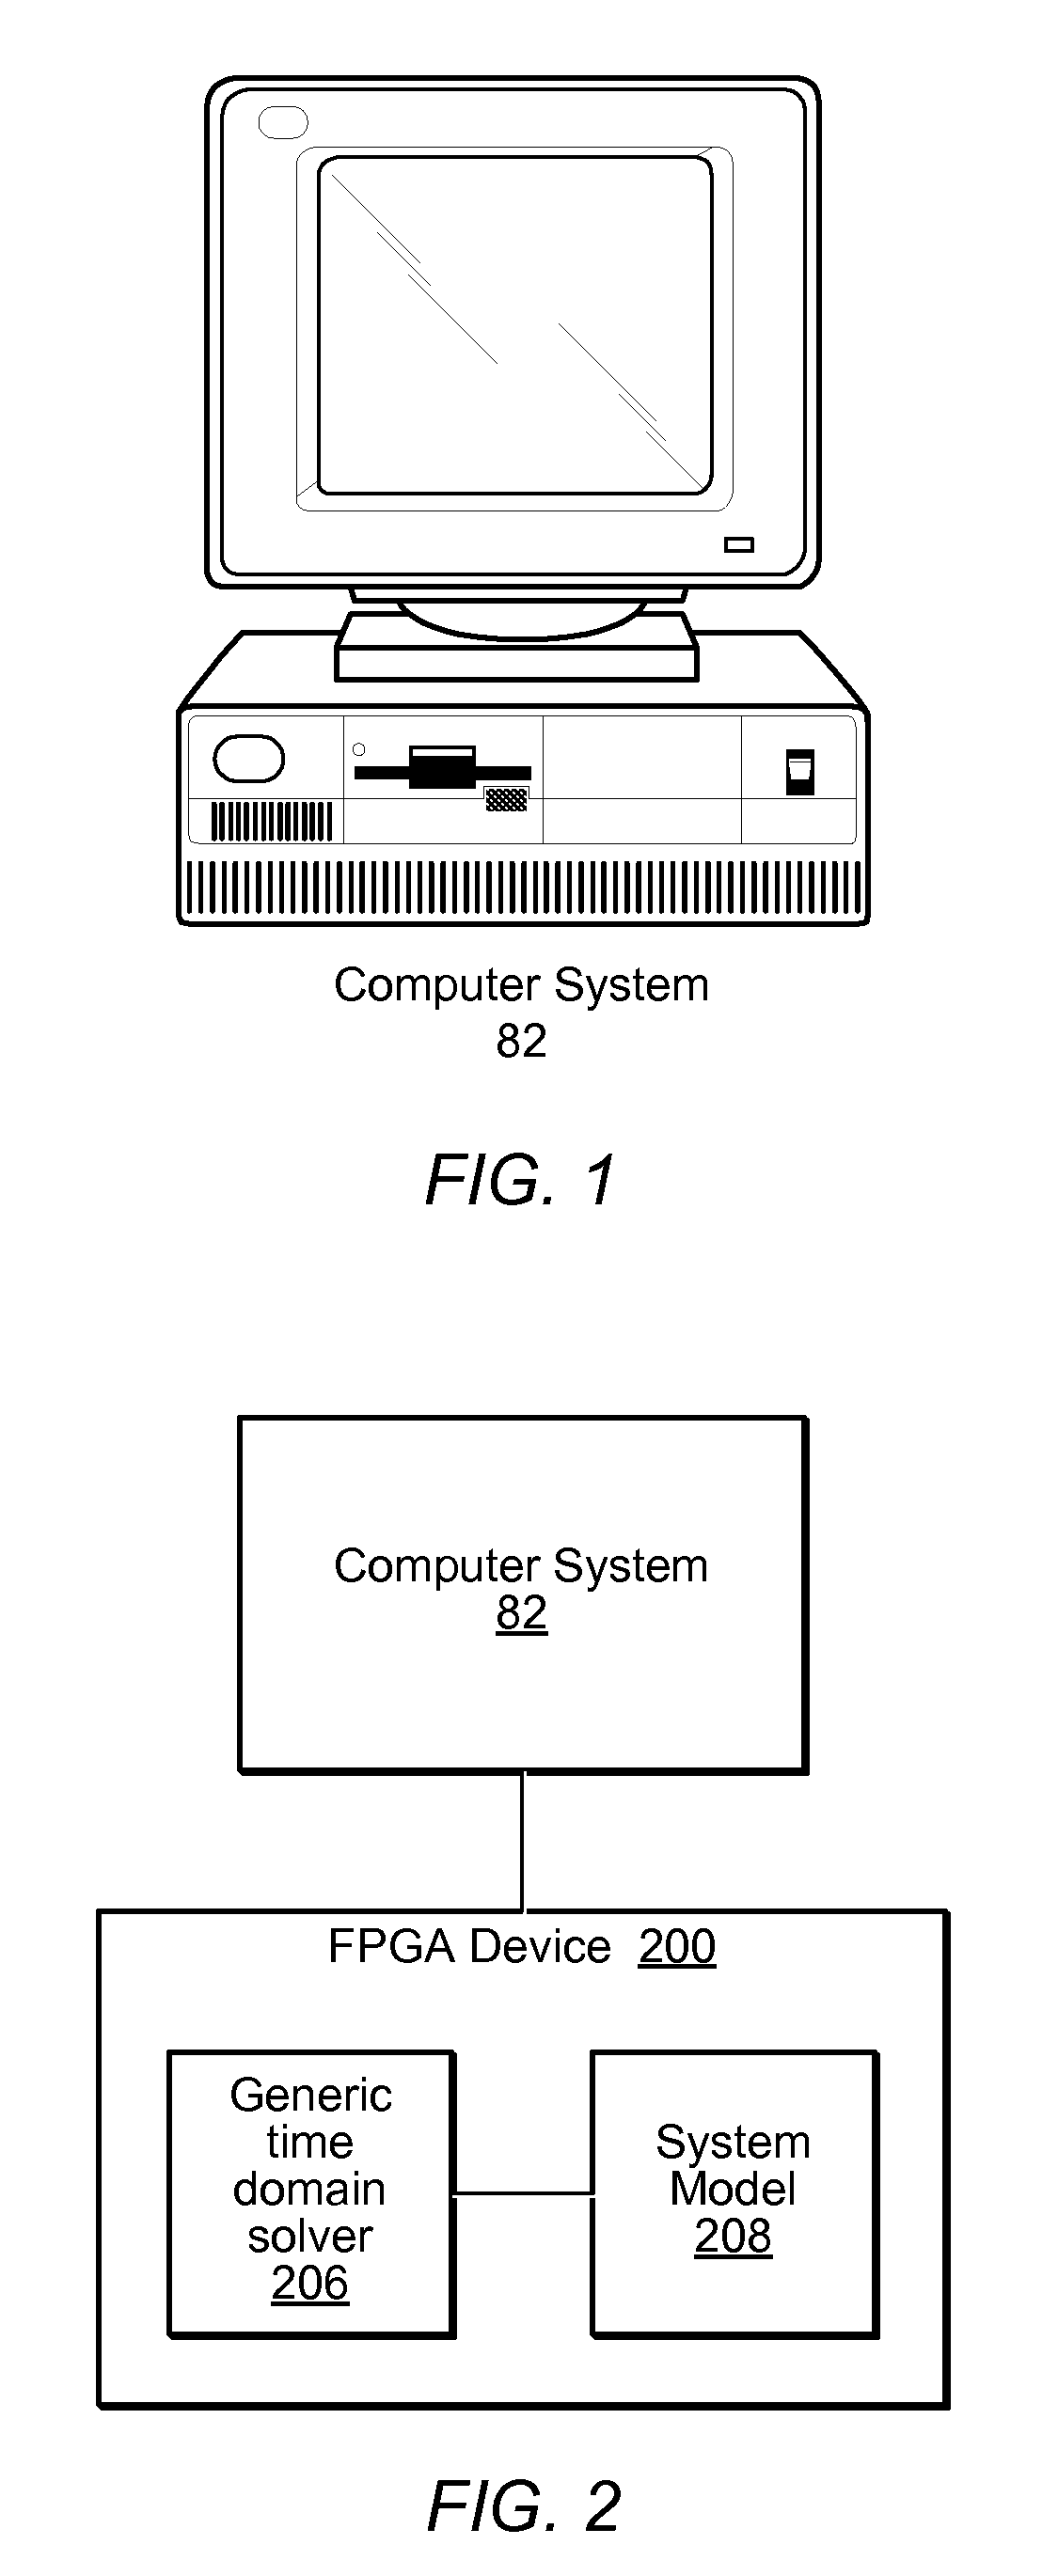 System simulation and graphical data flow programming in a common environment using wire data flow